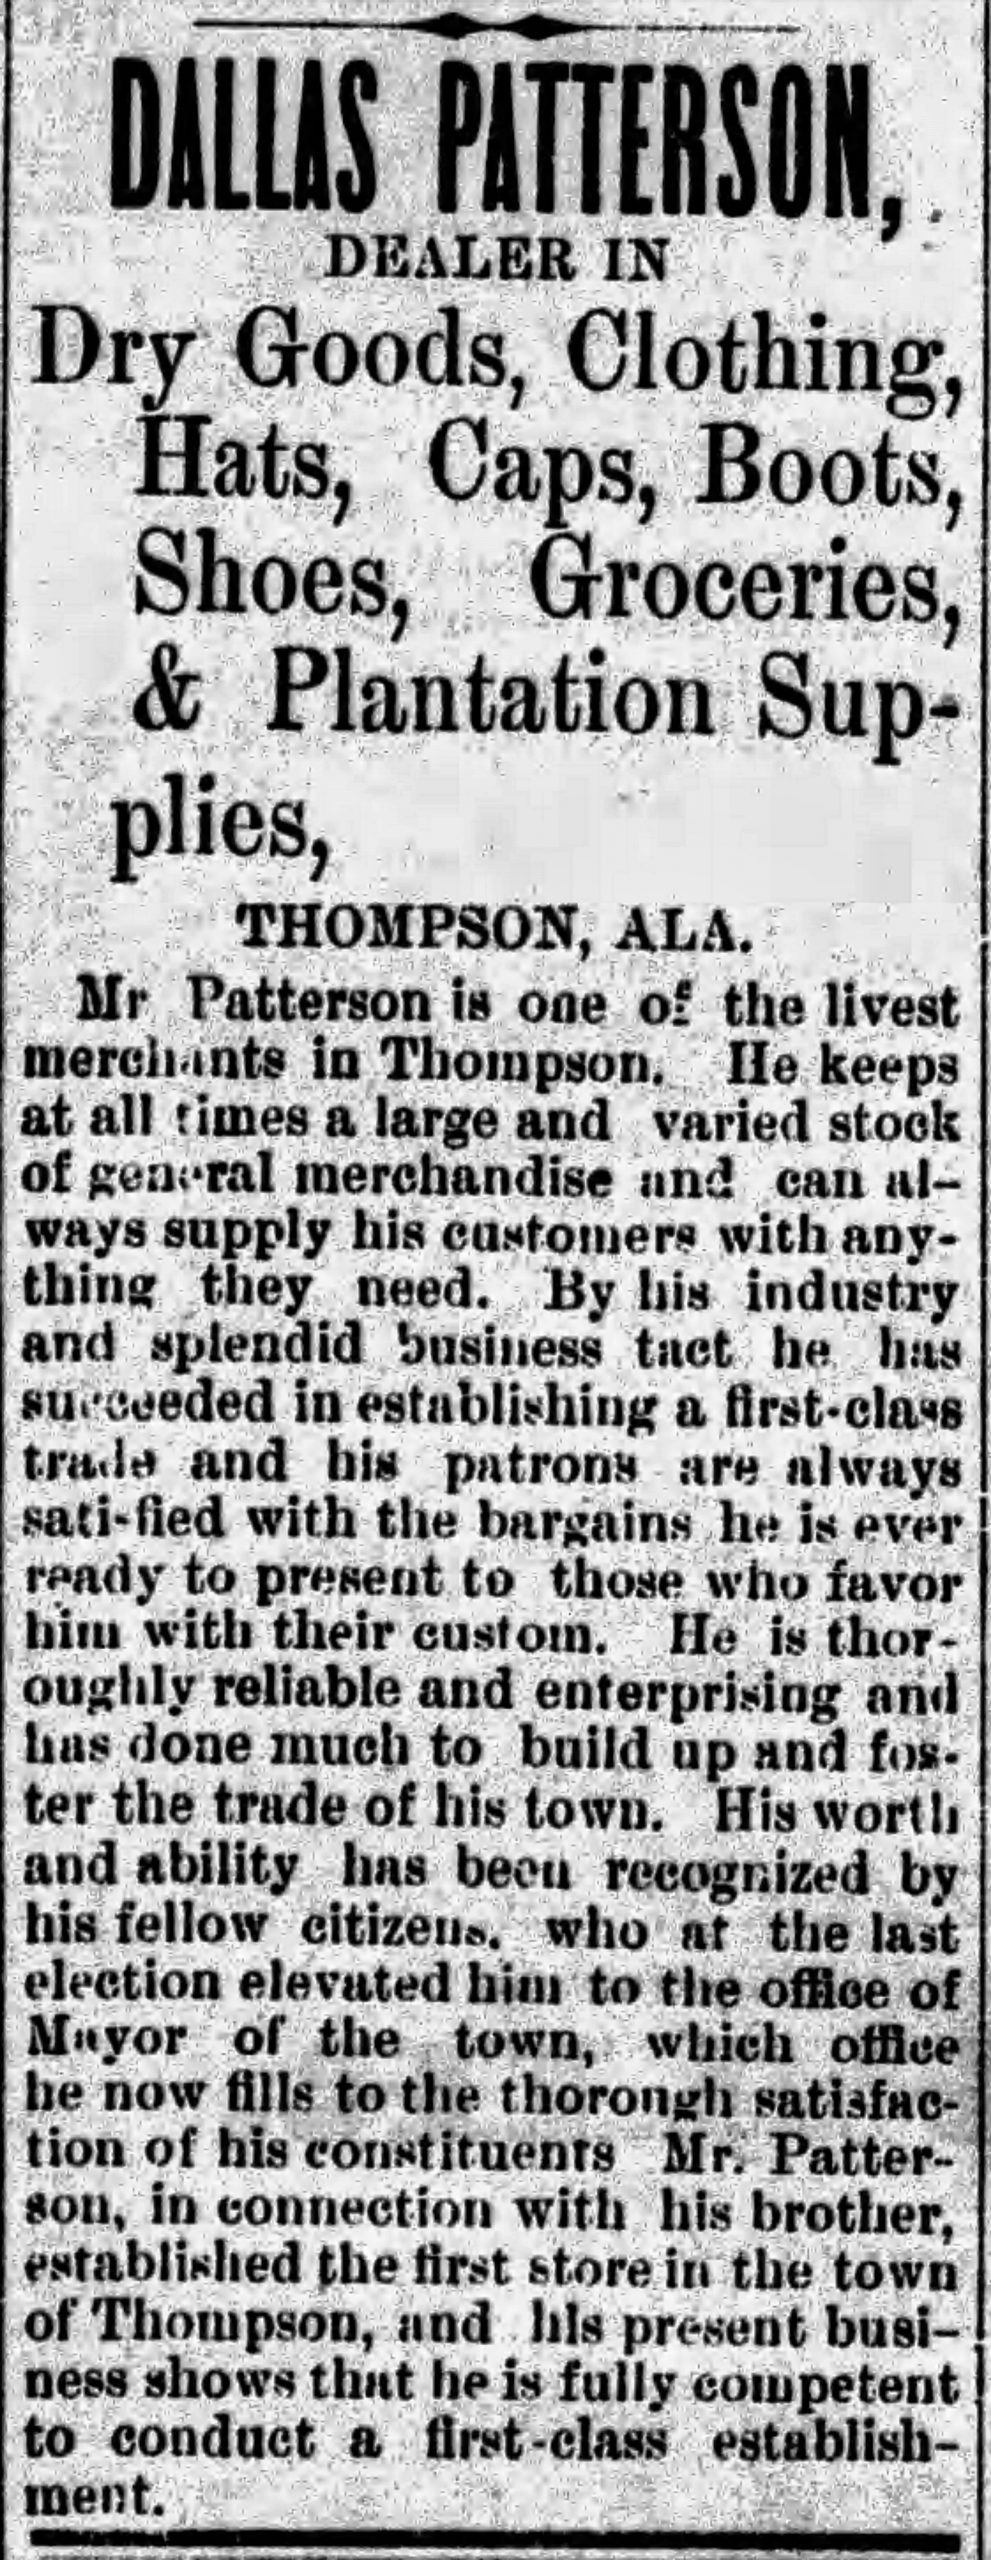 PATRON + Thompson, Alabama was incorporated in 1883 and had around 200 residents in 1885